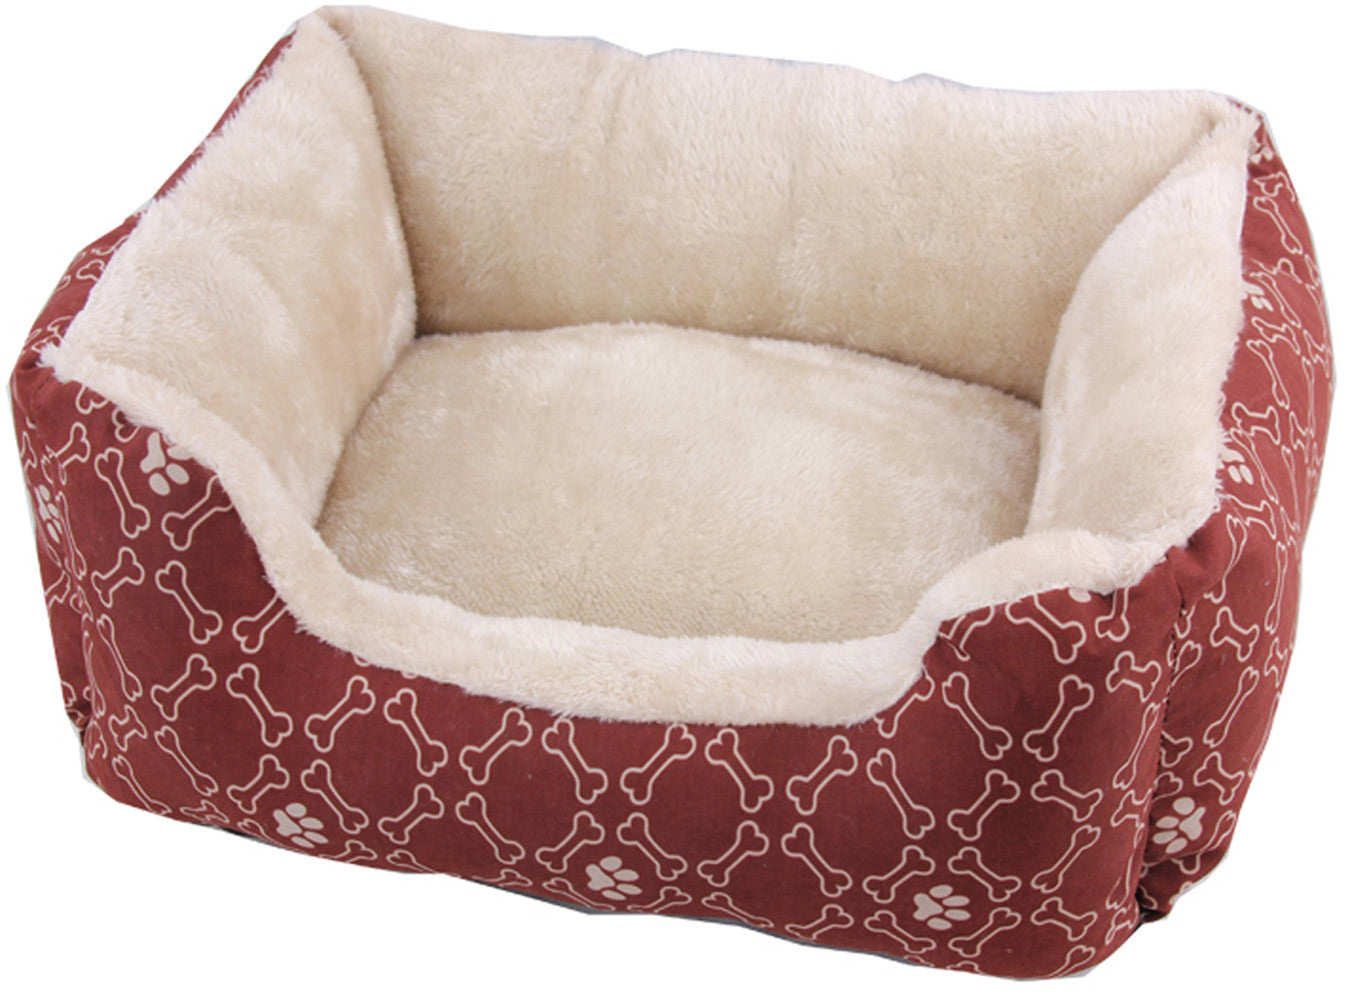 Pawise Square Dog Bed, Wine Red - 25"